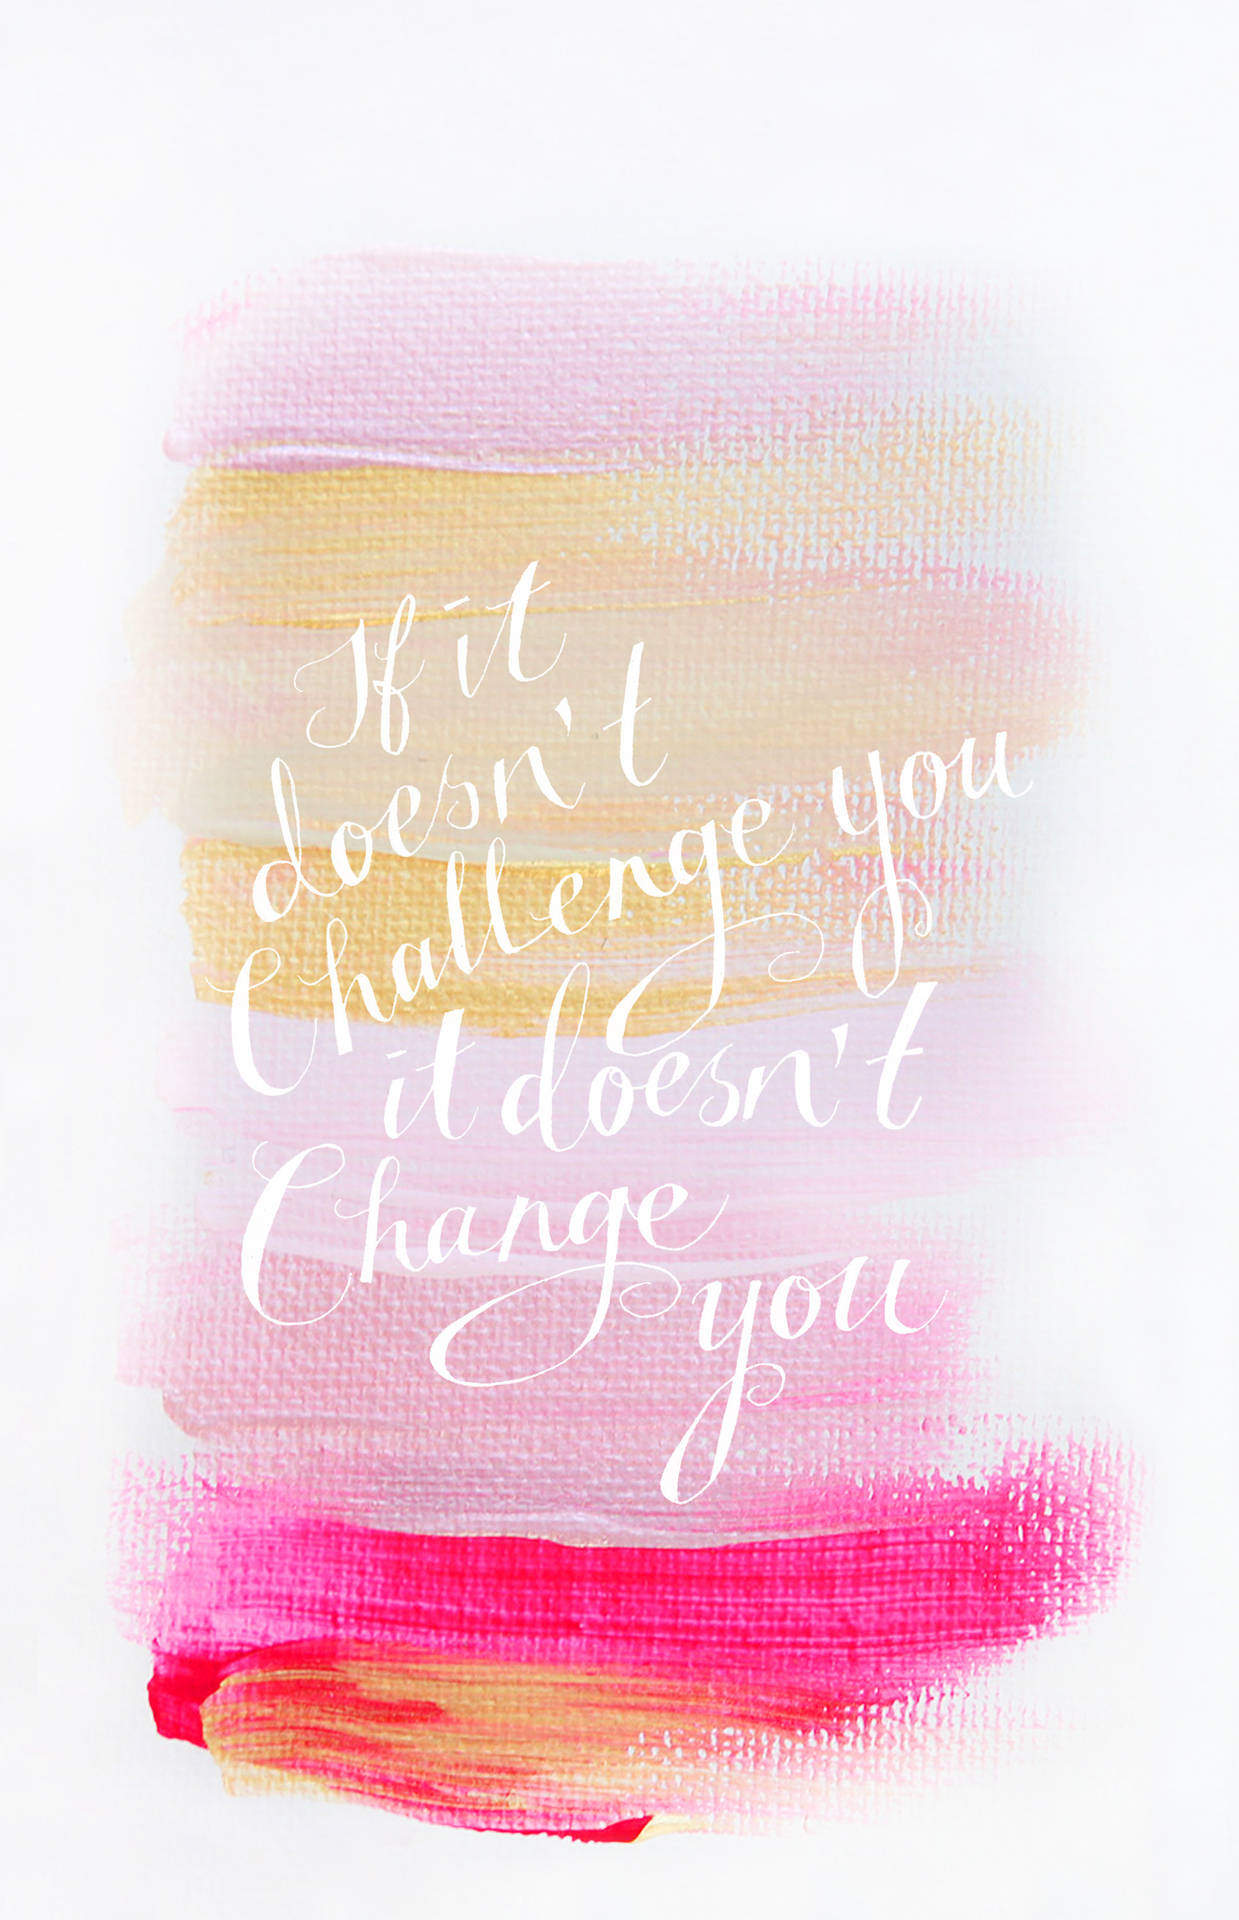 Aesthetic Yellow And Pink Cute Positive Quotes Background